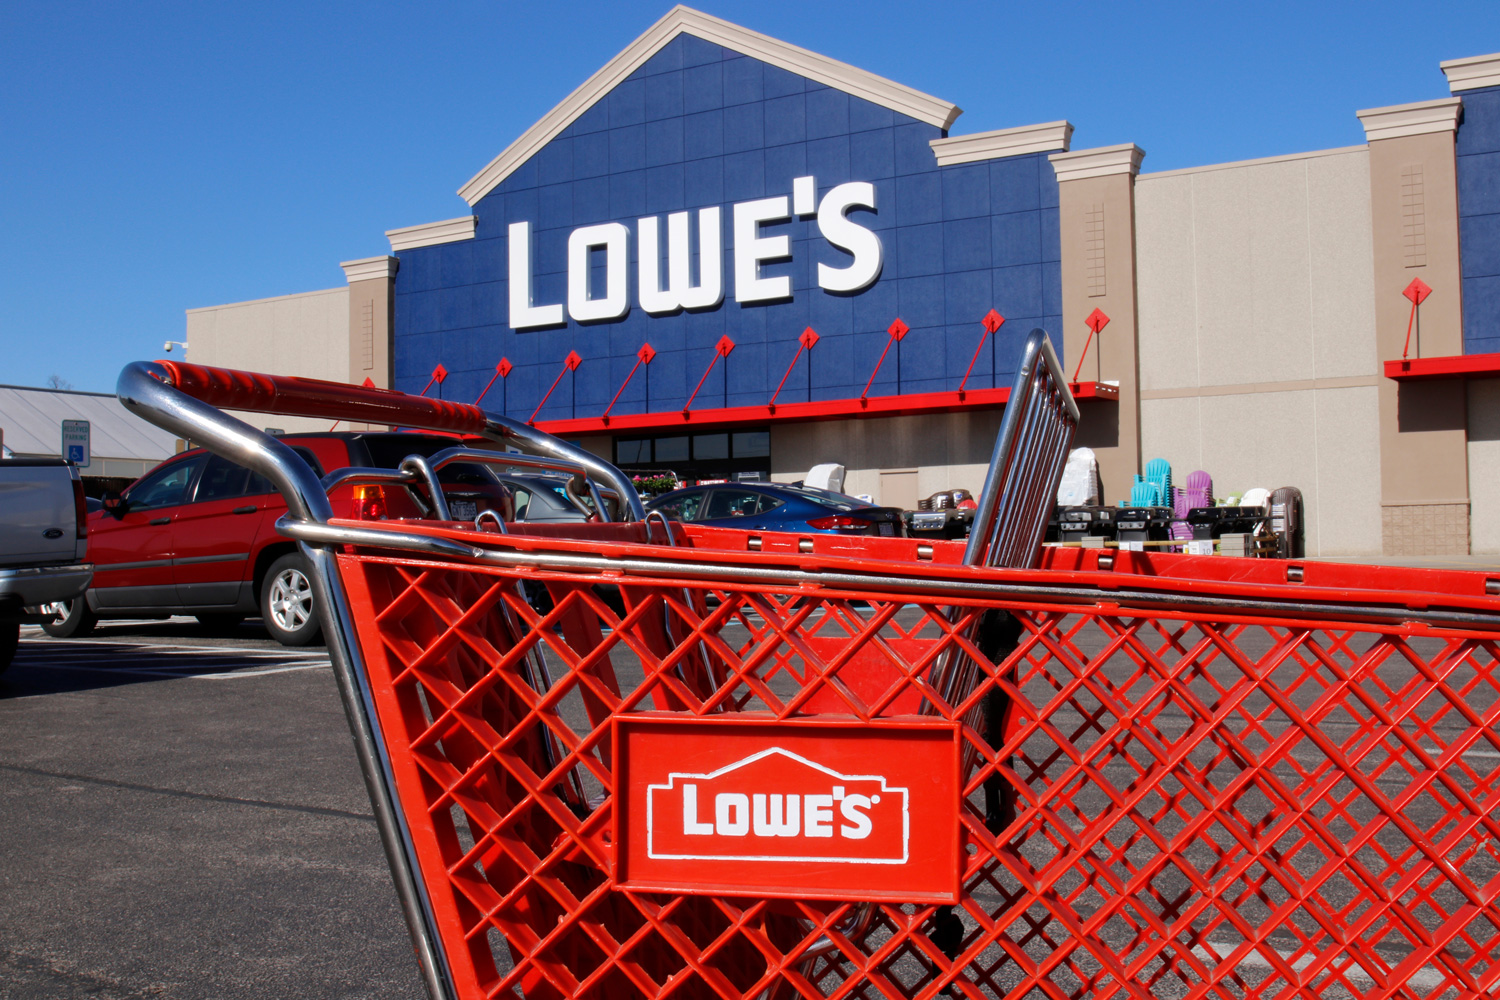 Lowe's Home Improvement Warehouse. Lowe's operates retail home improvement and appliance stores in North America